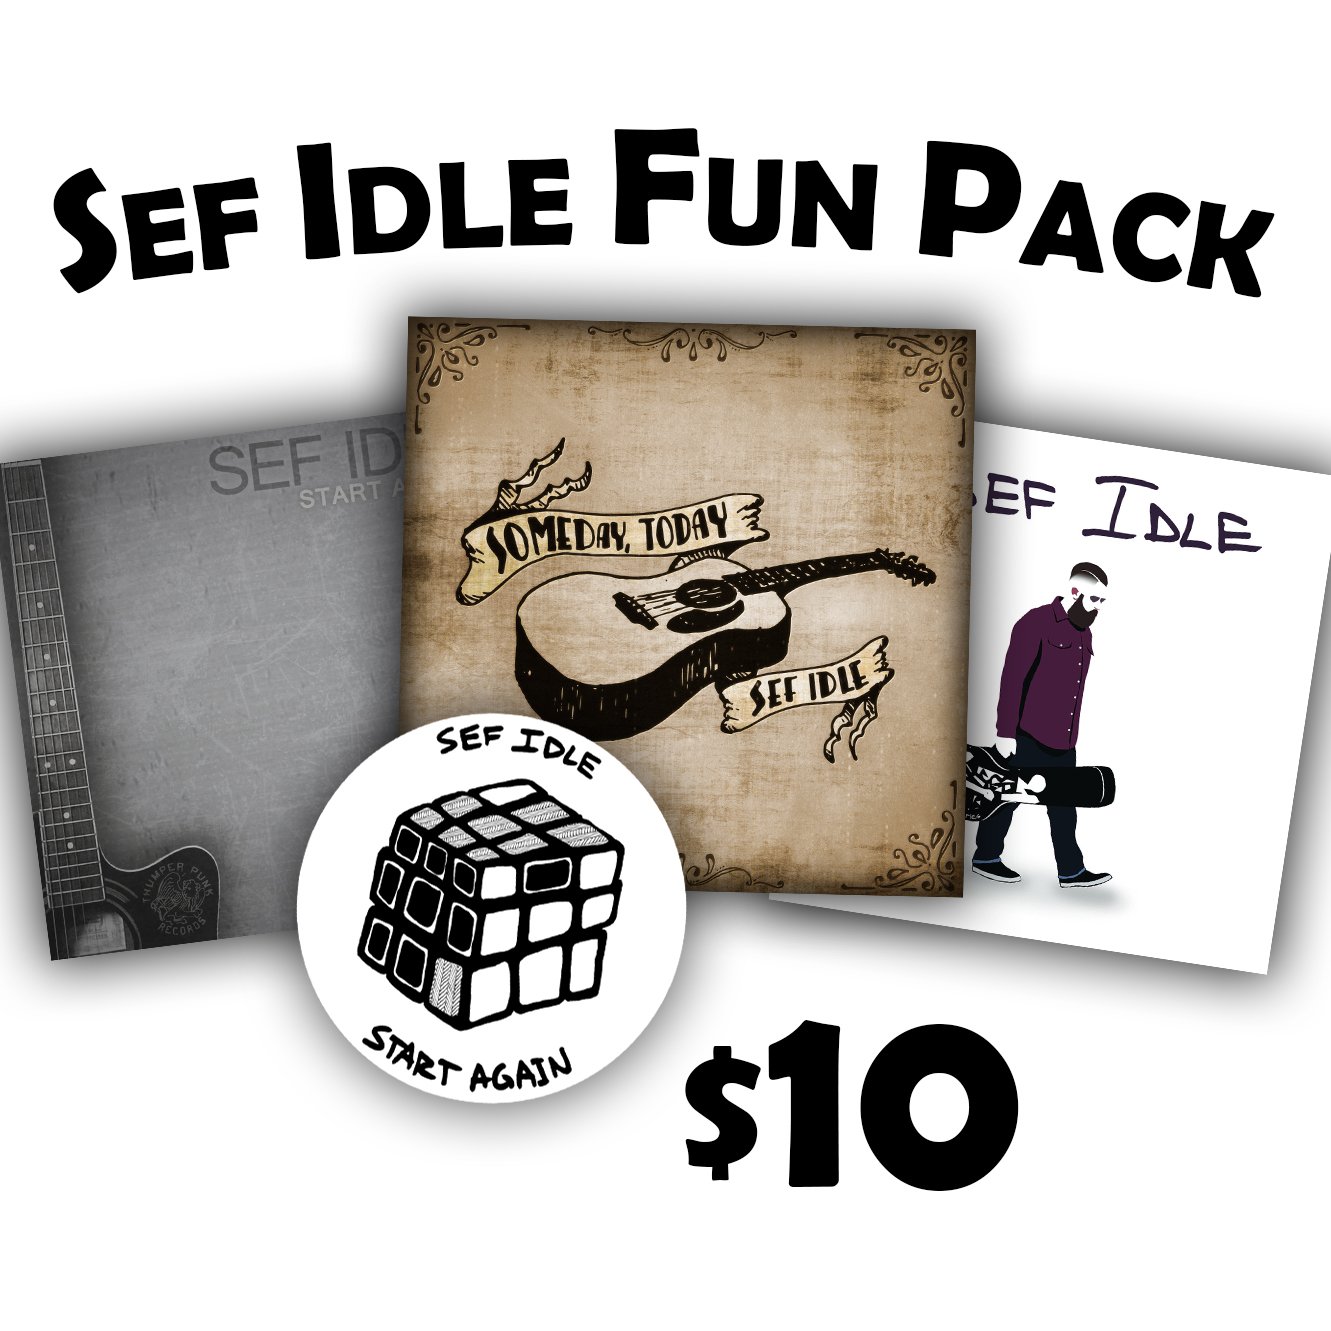 Image of Sef Idle Fun Pack